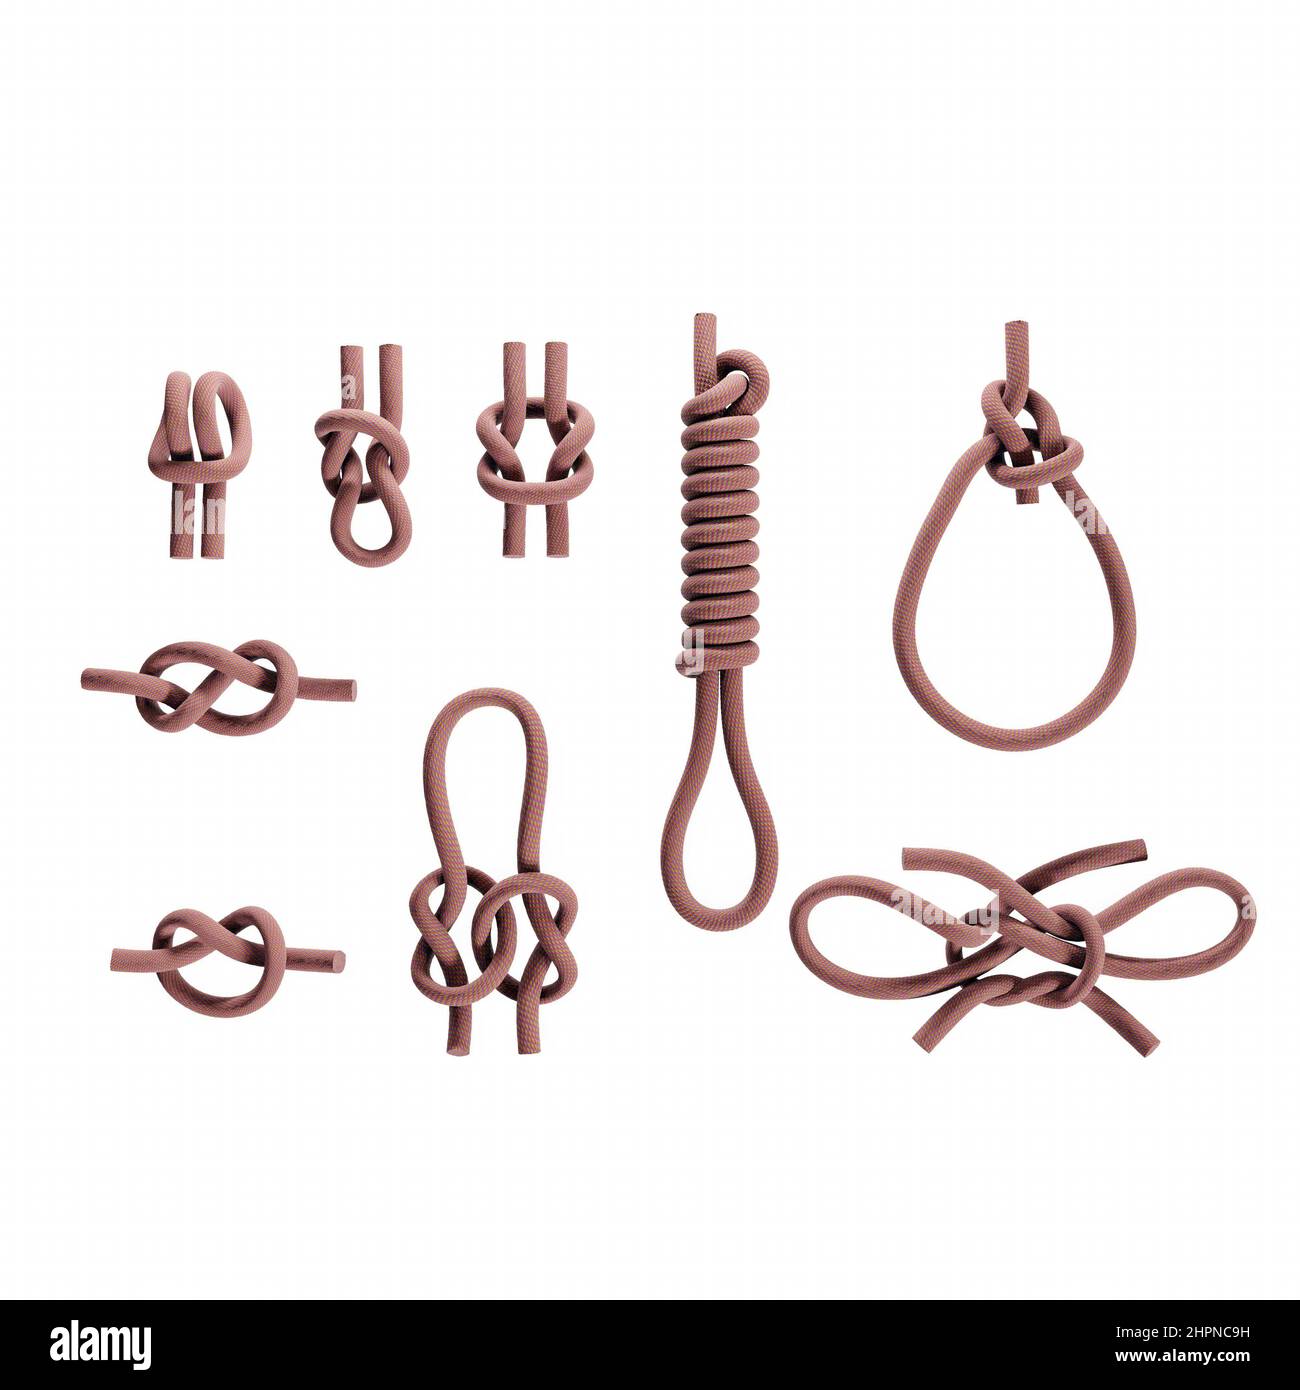 3D rendering of nine basic types of rope knots on white background Stock Photo